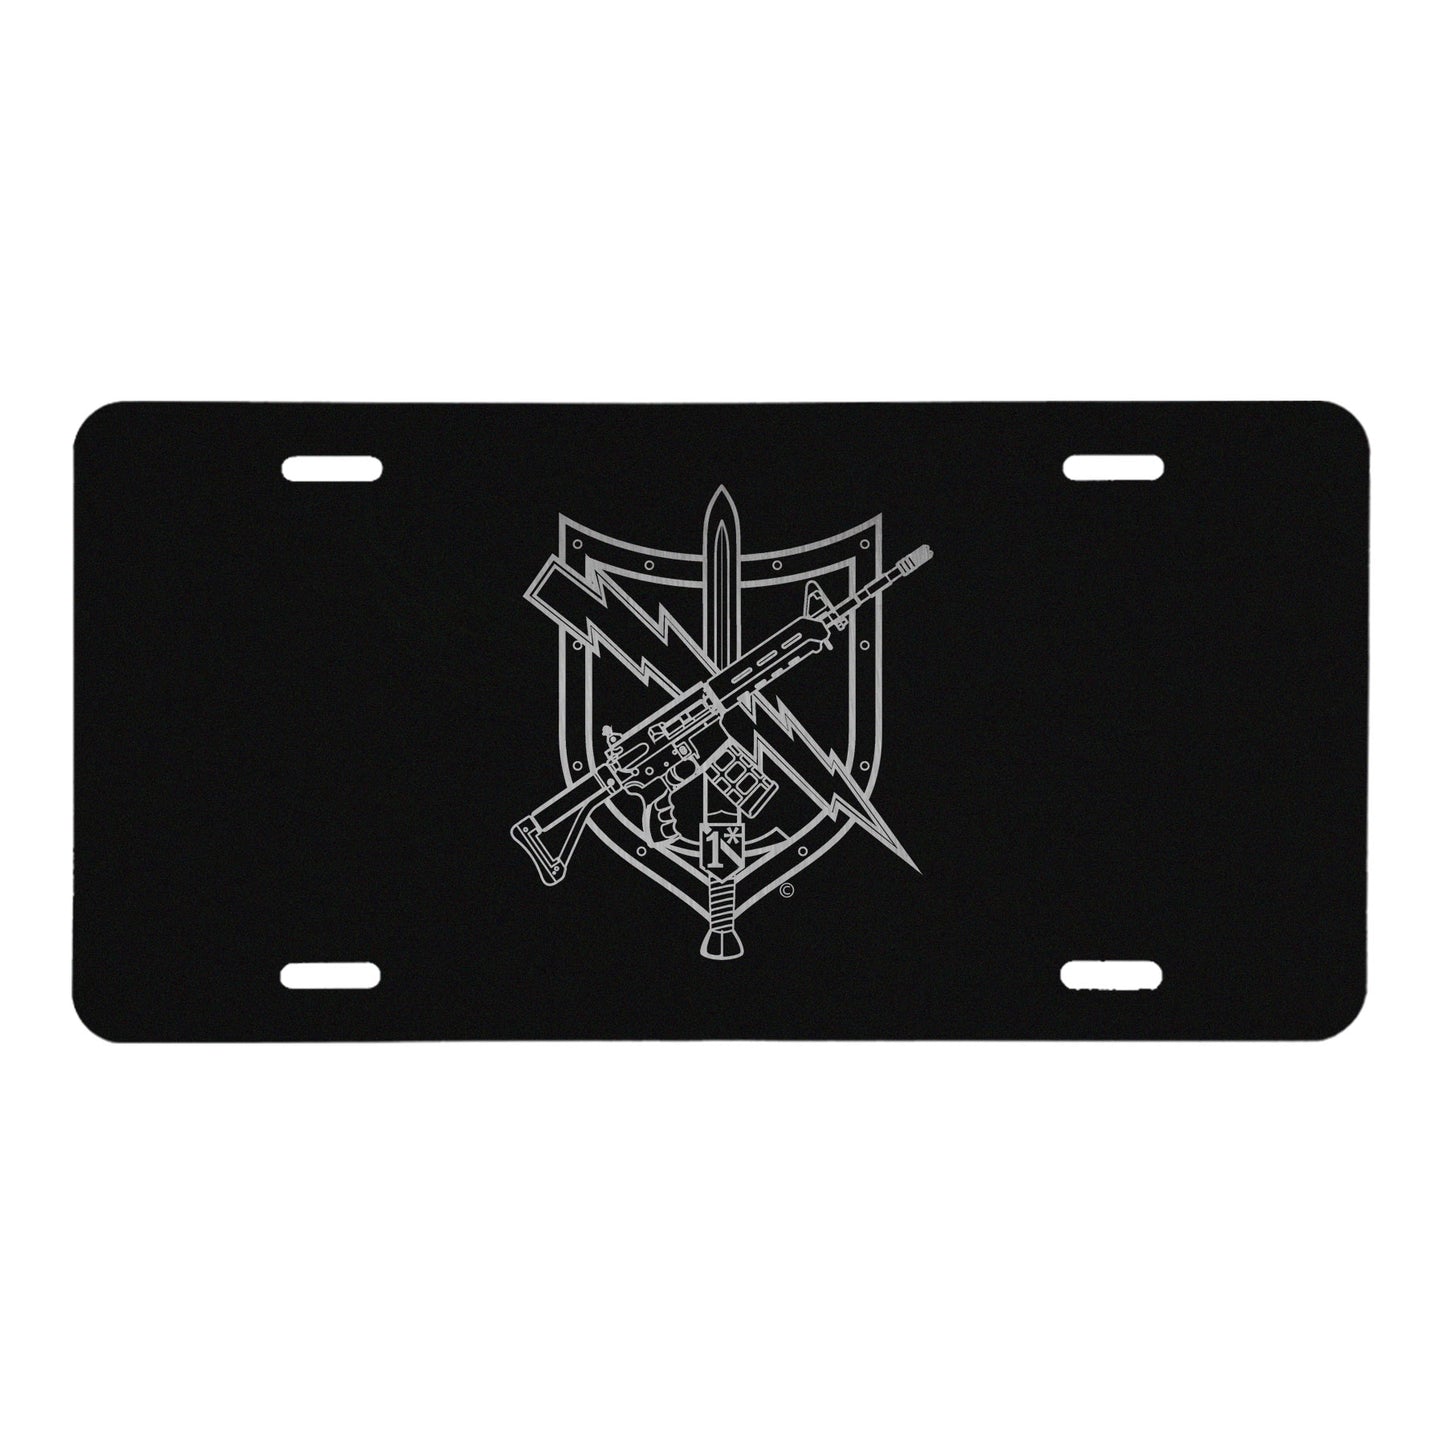 Tactical Patrol Officer License Plate